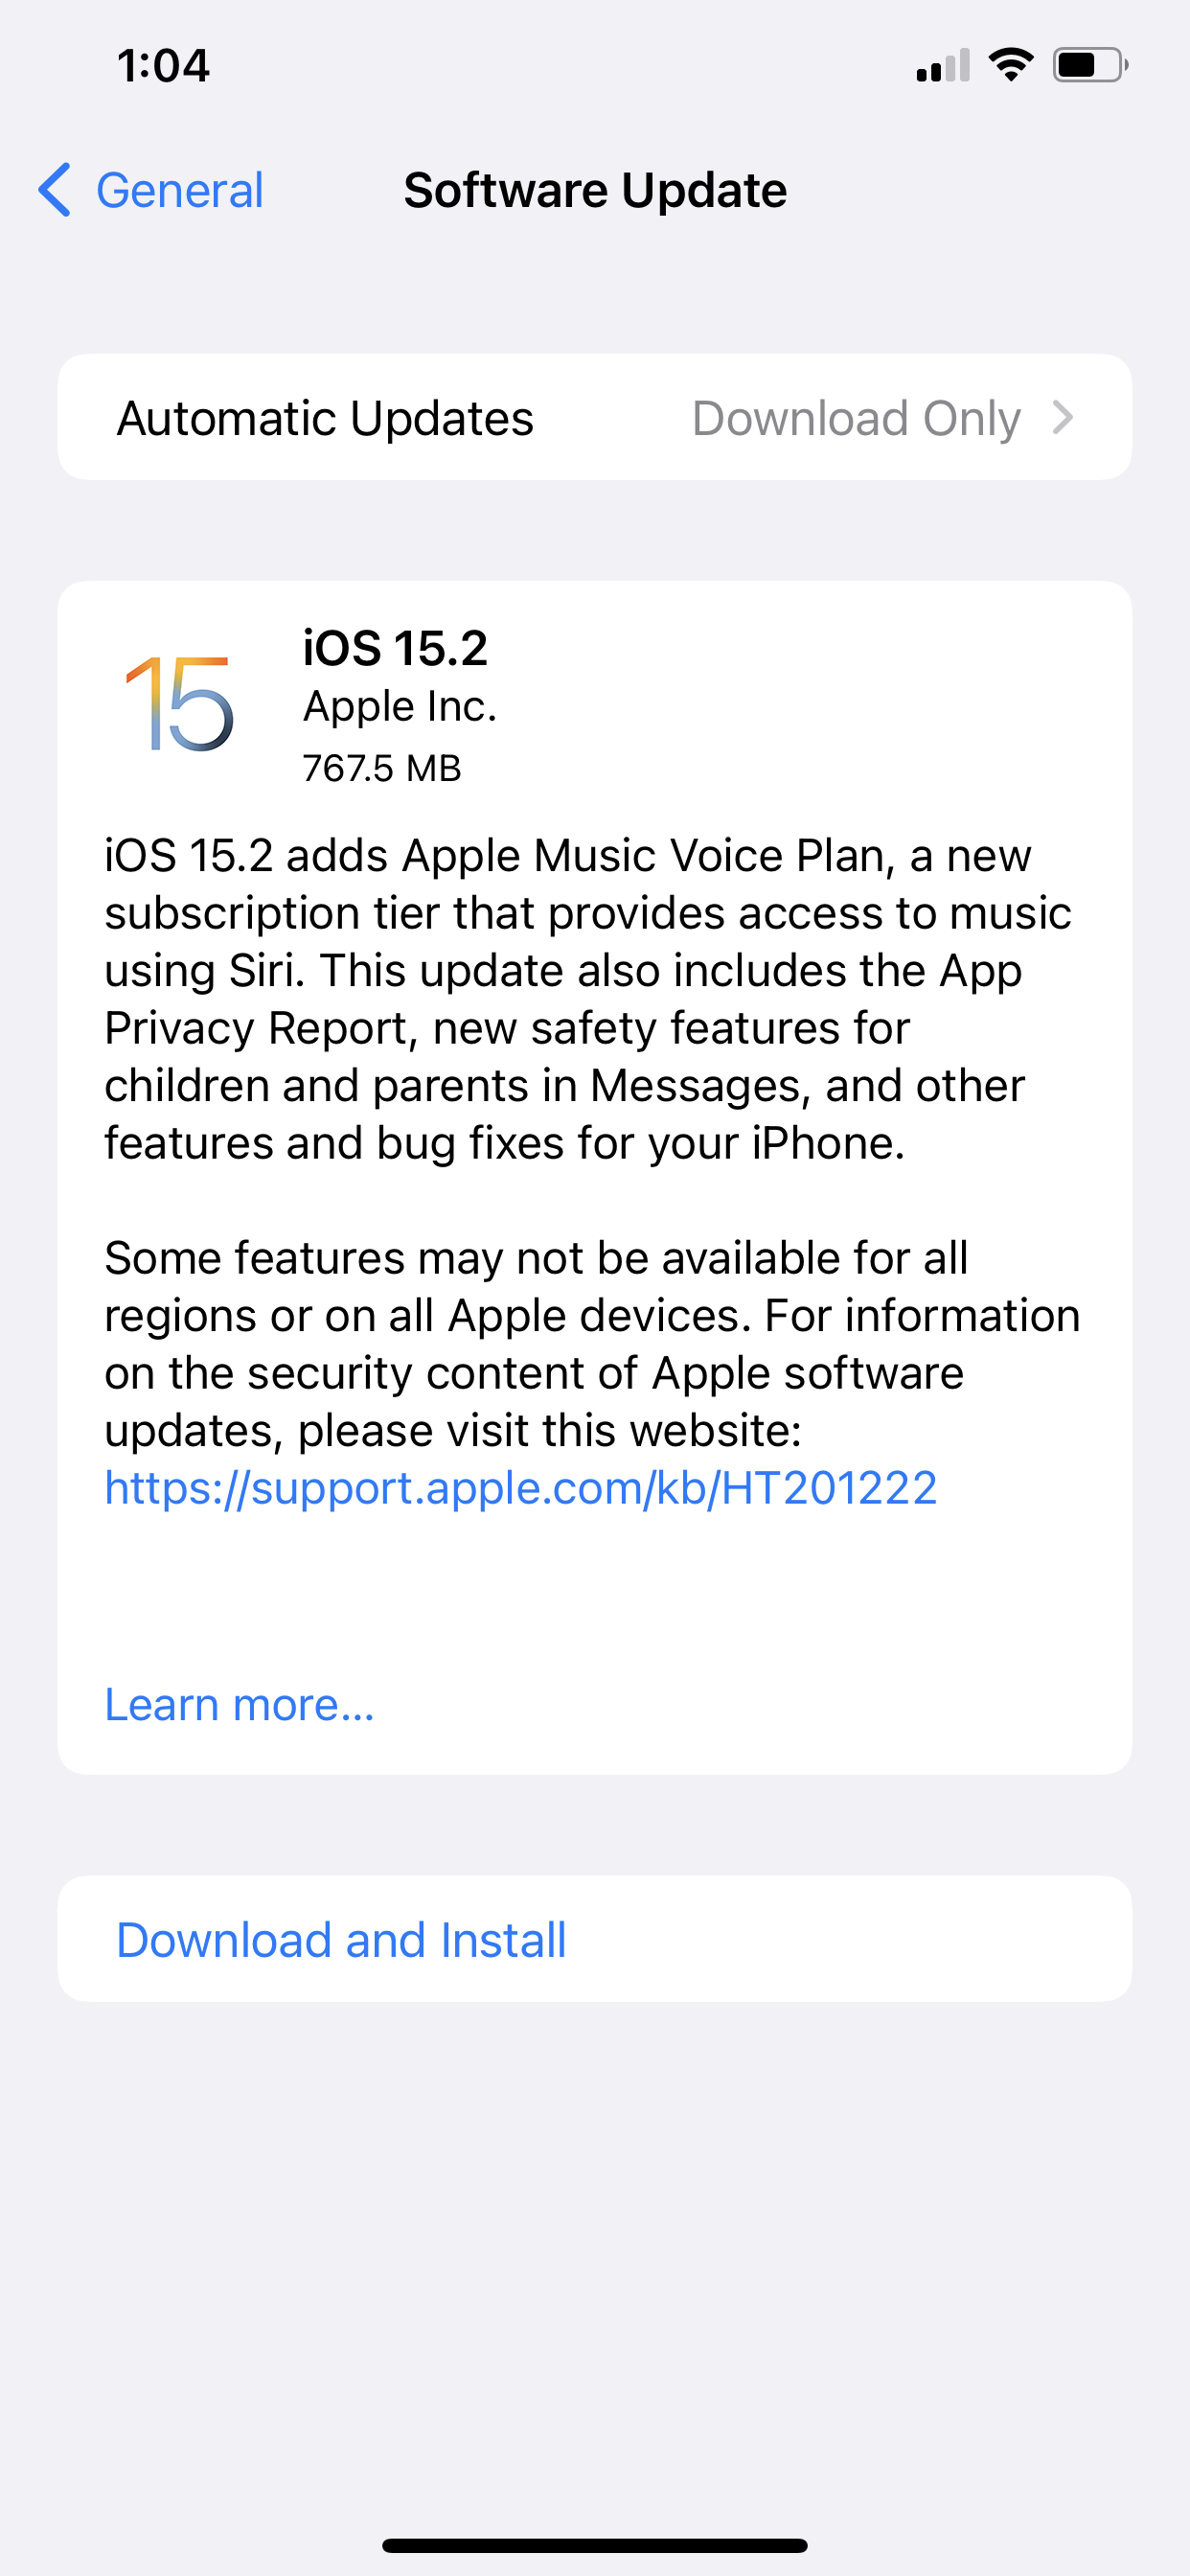 Apple Releases iOS 15.2 and iPadOS 15.2 With Apple Music Voice Plan, App Privacy Report, More [Download]